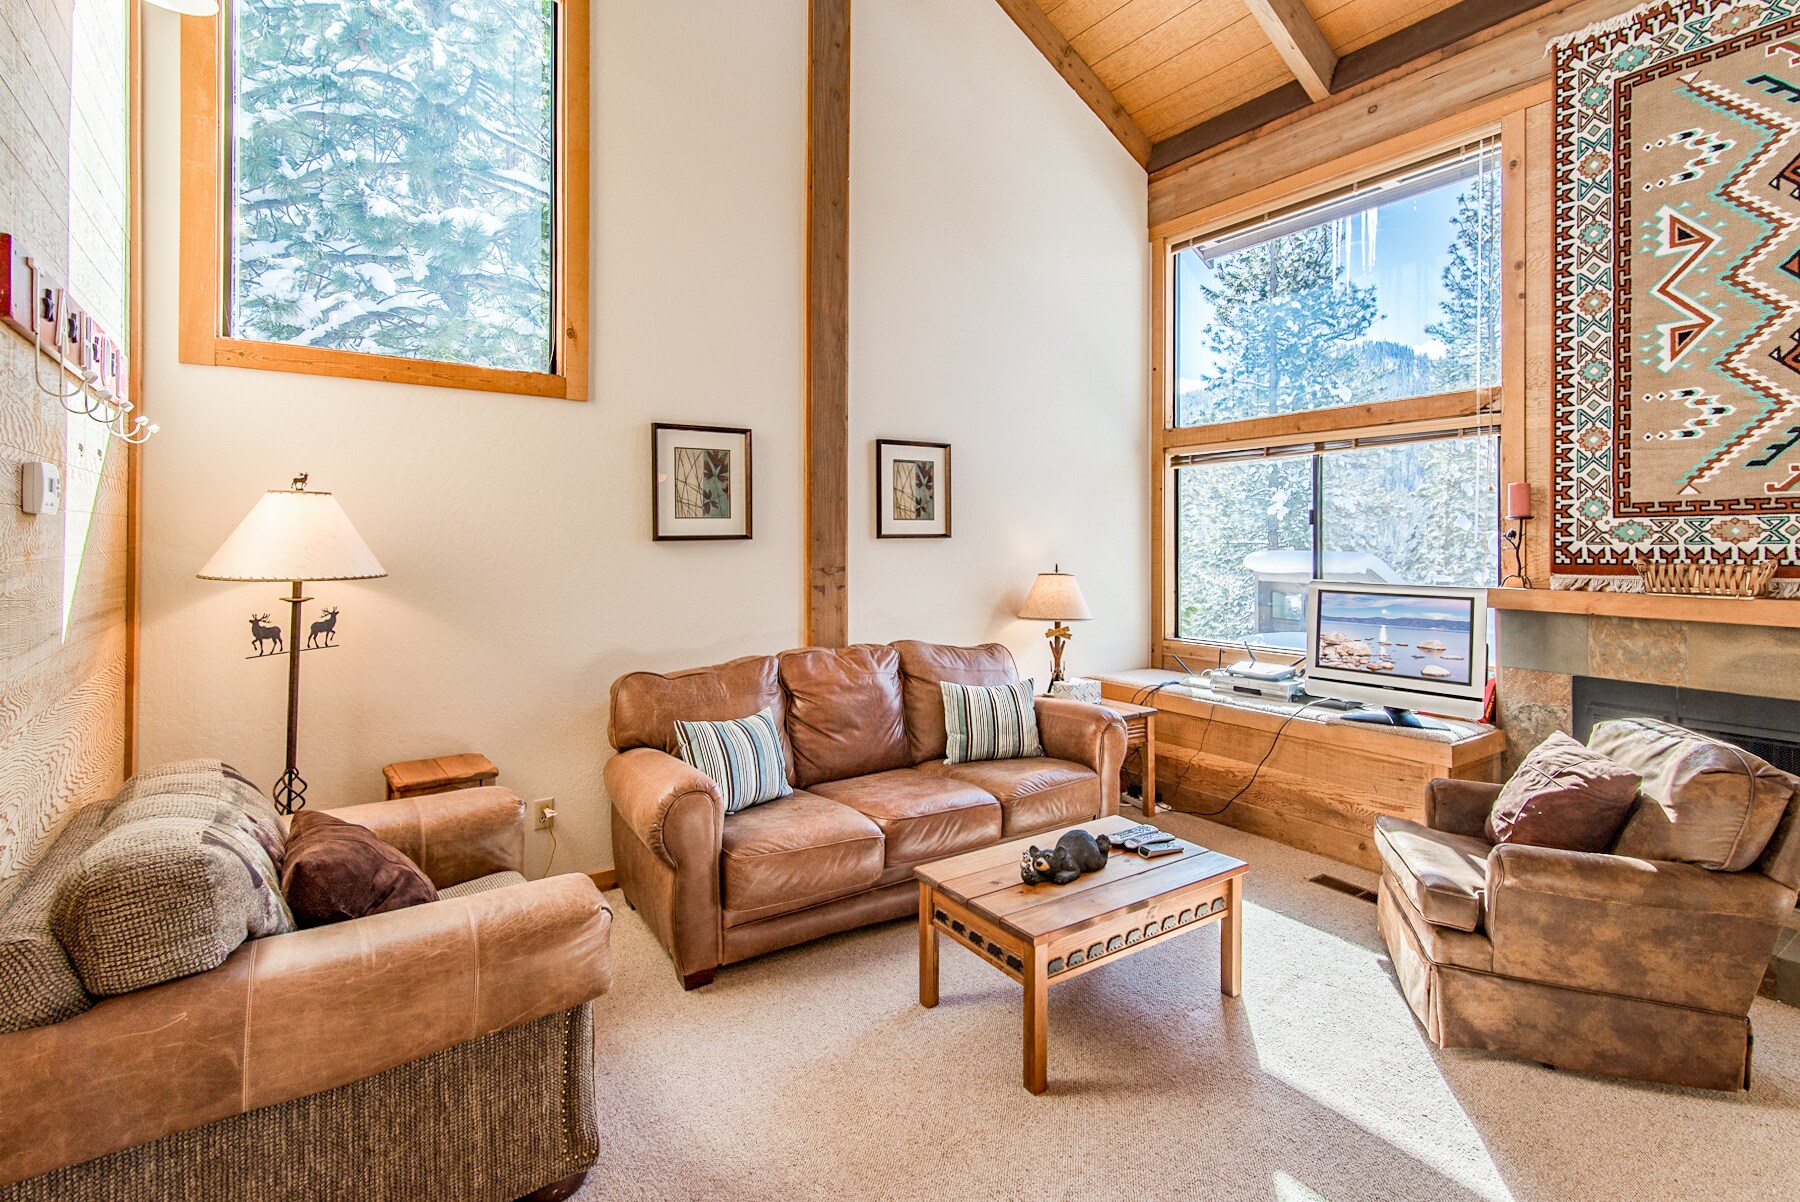 Welcome to Truckee! Your rental is professionally managed by TurnKey Vacation Rentals.